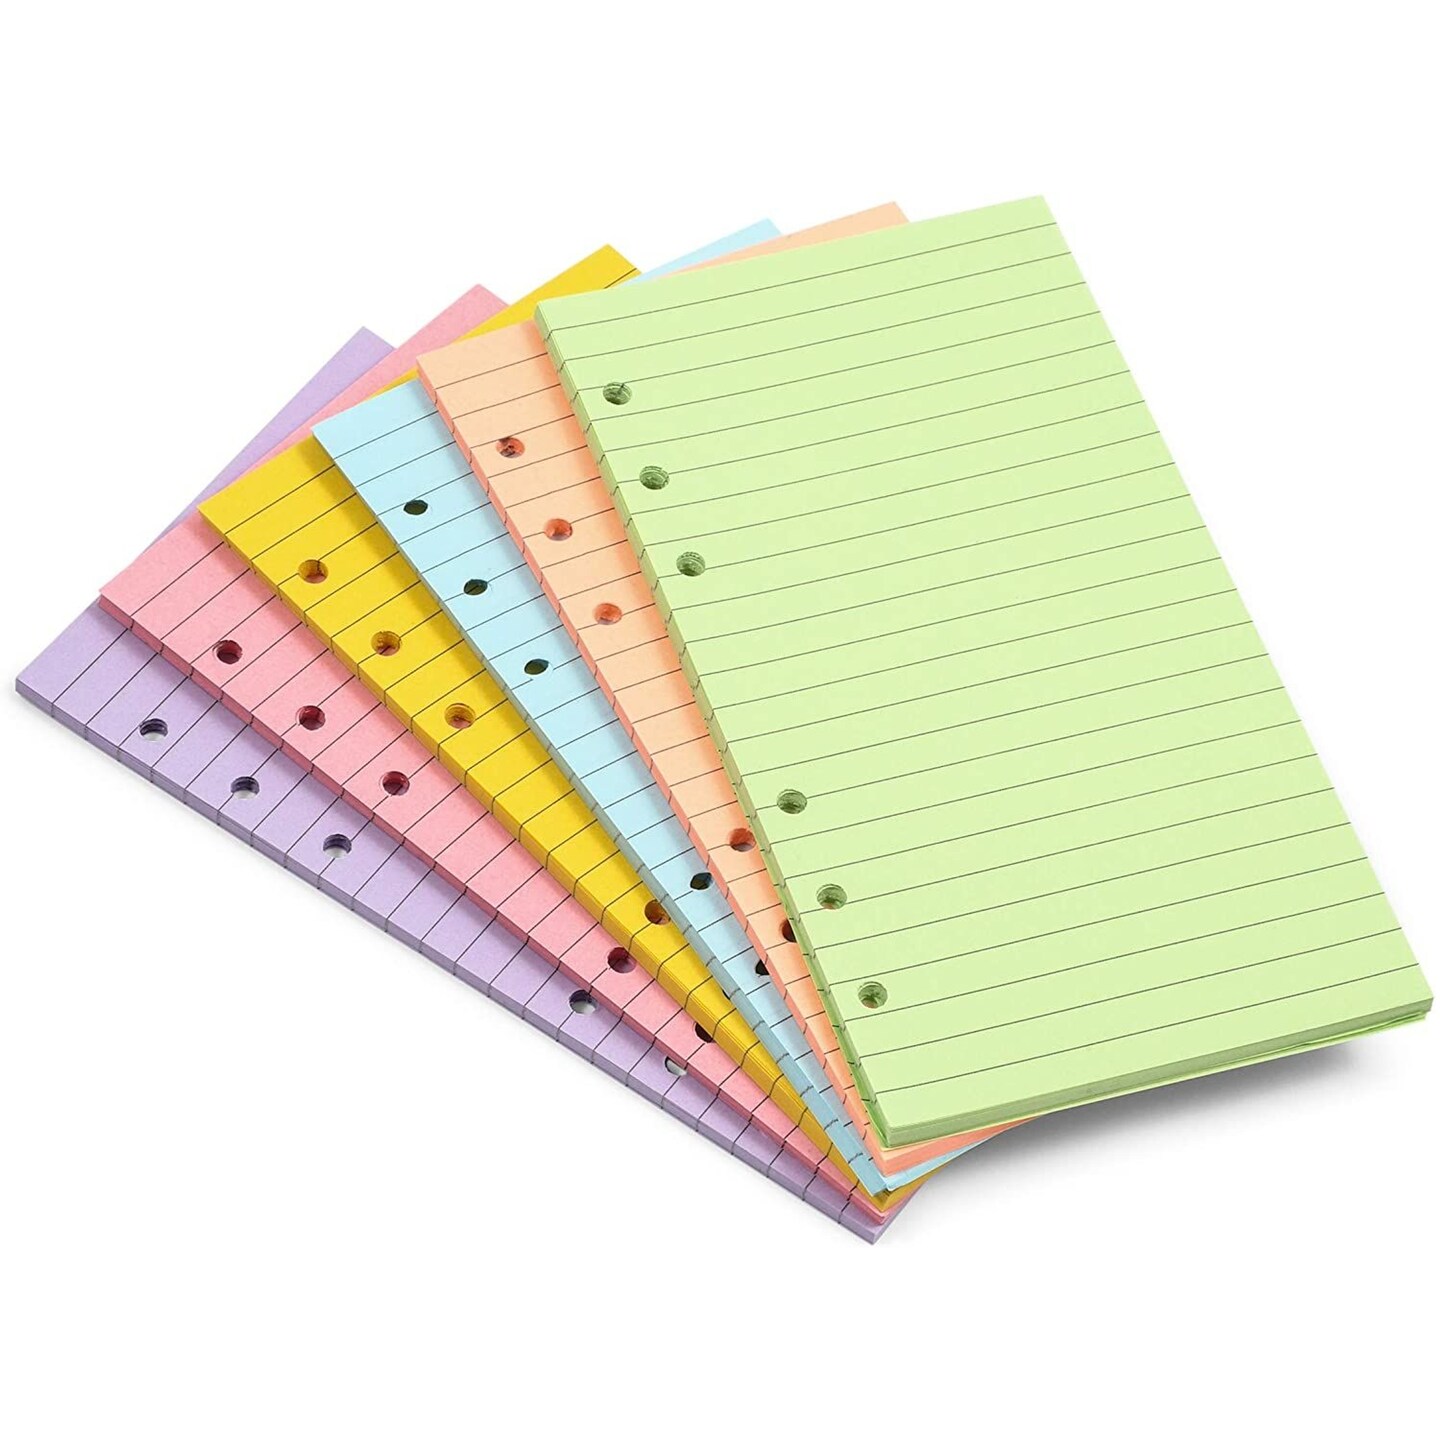 Lined Binder Paper, A6 Refill 6 Hole Punch Paper (6 Colors, 240 Sheets)  98781101627